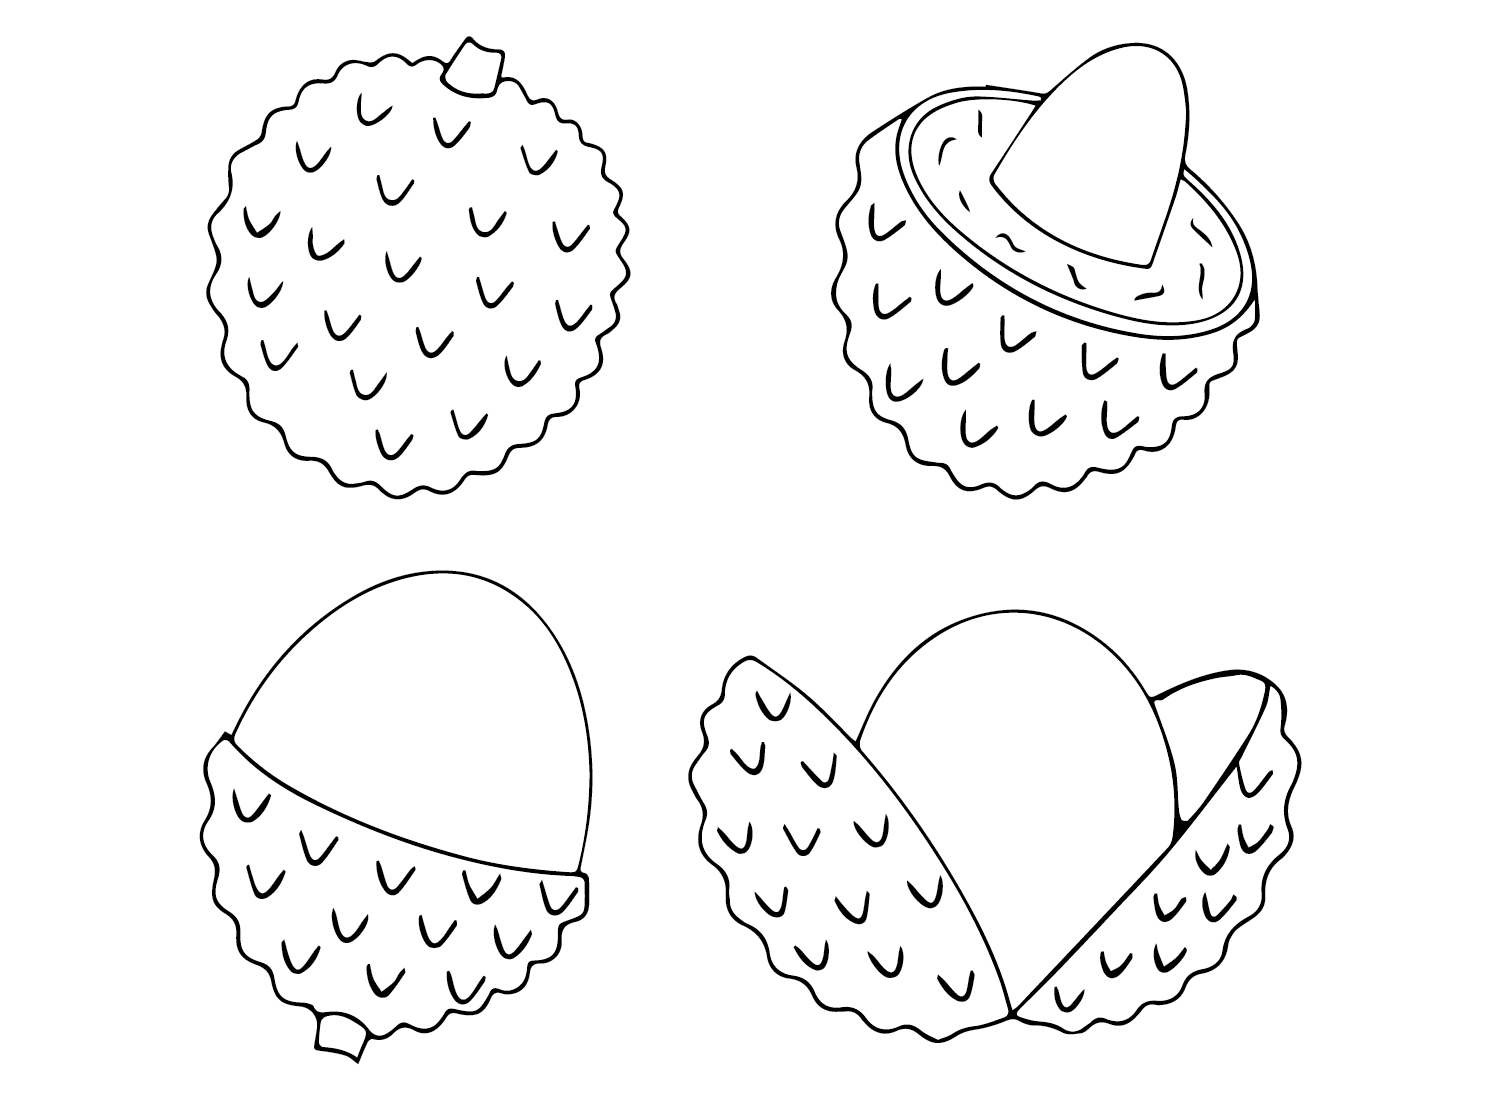 Lychee Images Coloring Page